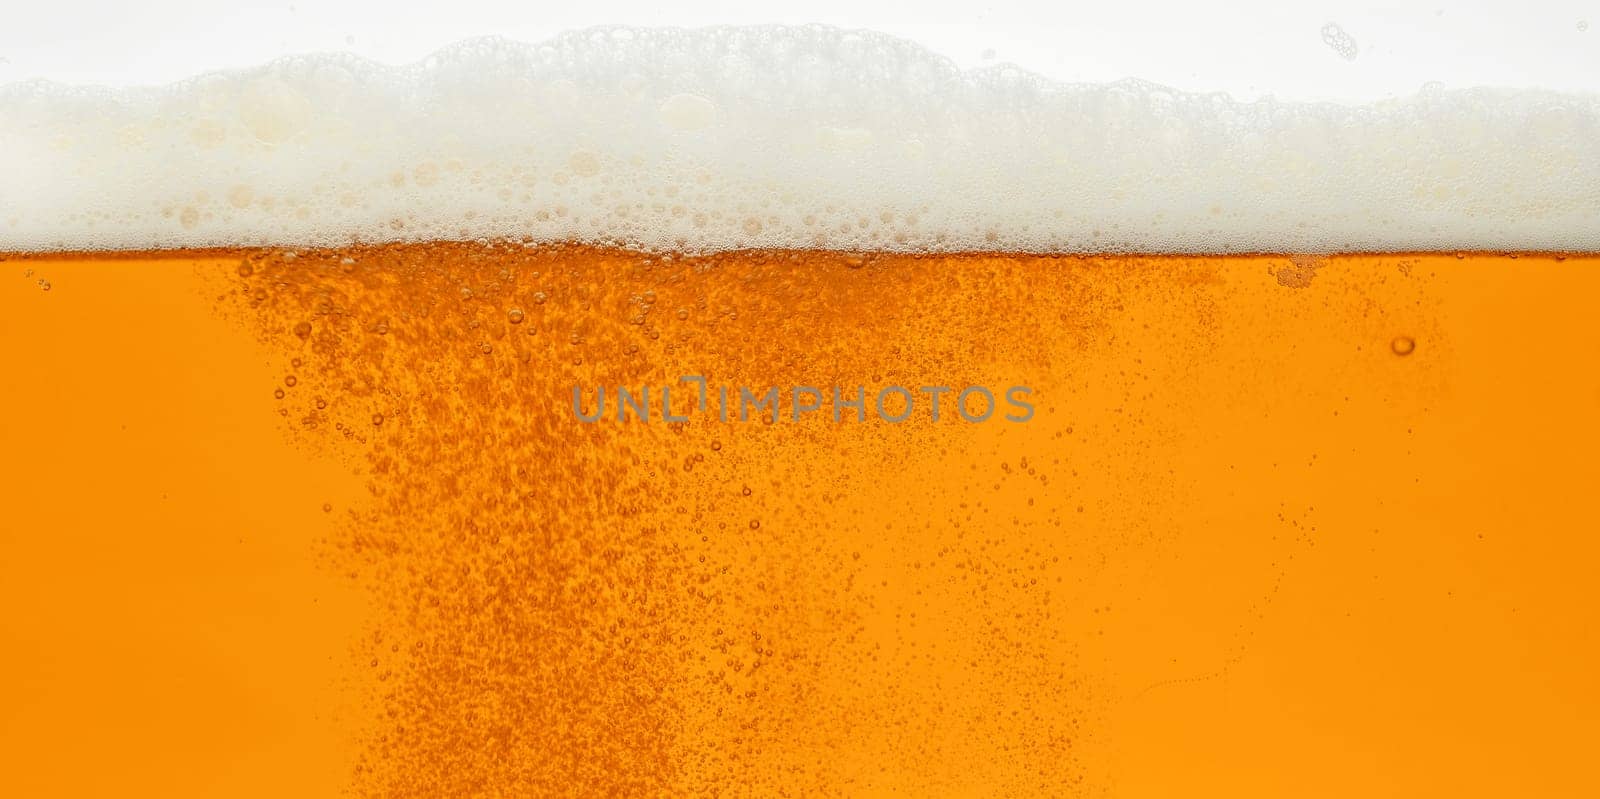 Close up background texture of lager beer with bubbles and froth, pouring in glass, low angle, side view